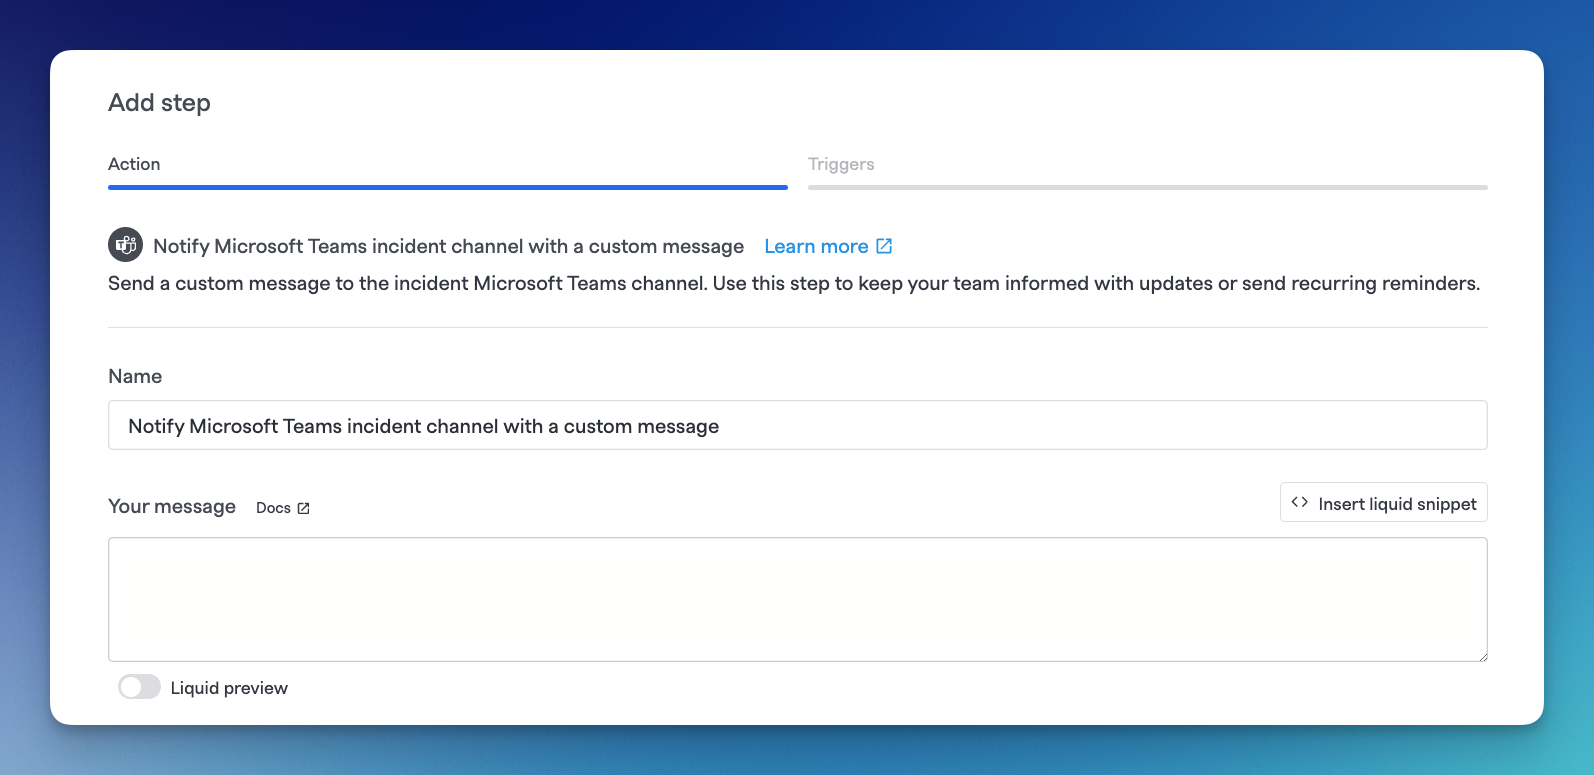 Notify Microsoft Teams incident channel w/ a custom message step